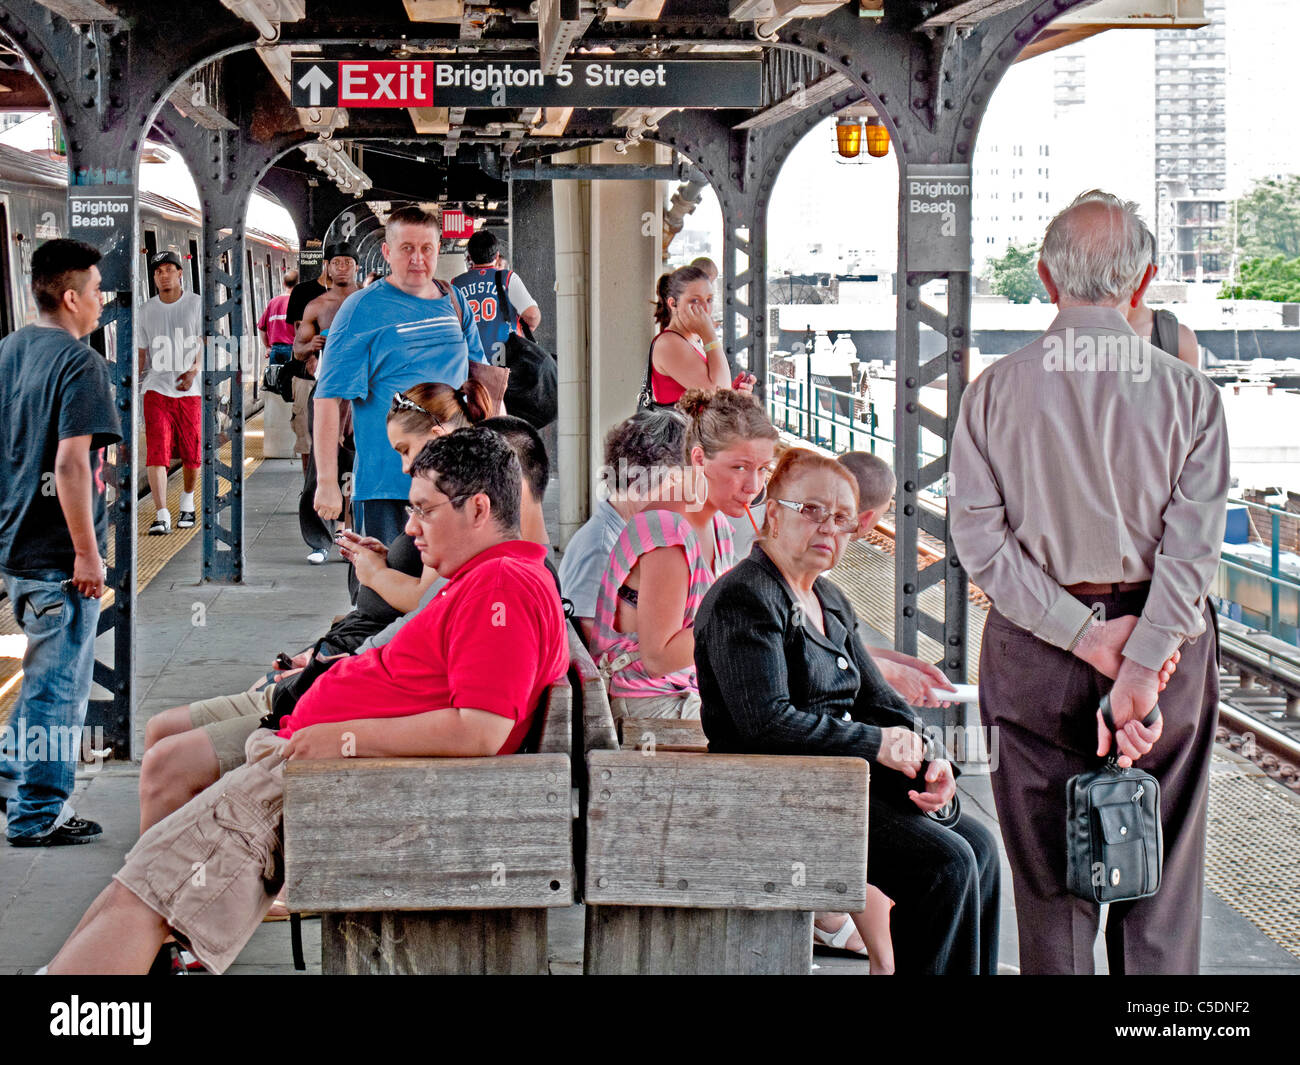 Passengers wait for a subway train at an elevated platform in the Brighton Beach neighborhood of Brooklyn, New York. Stock Photo